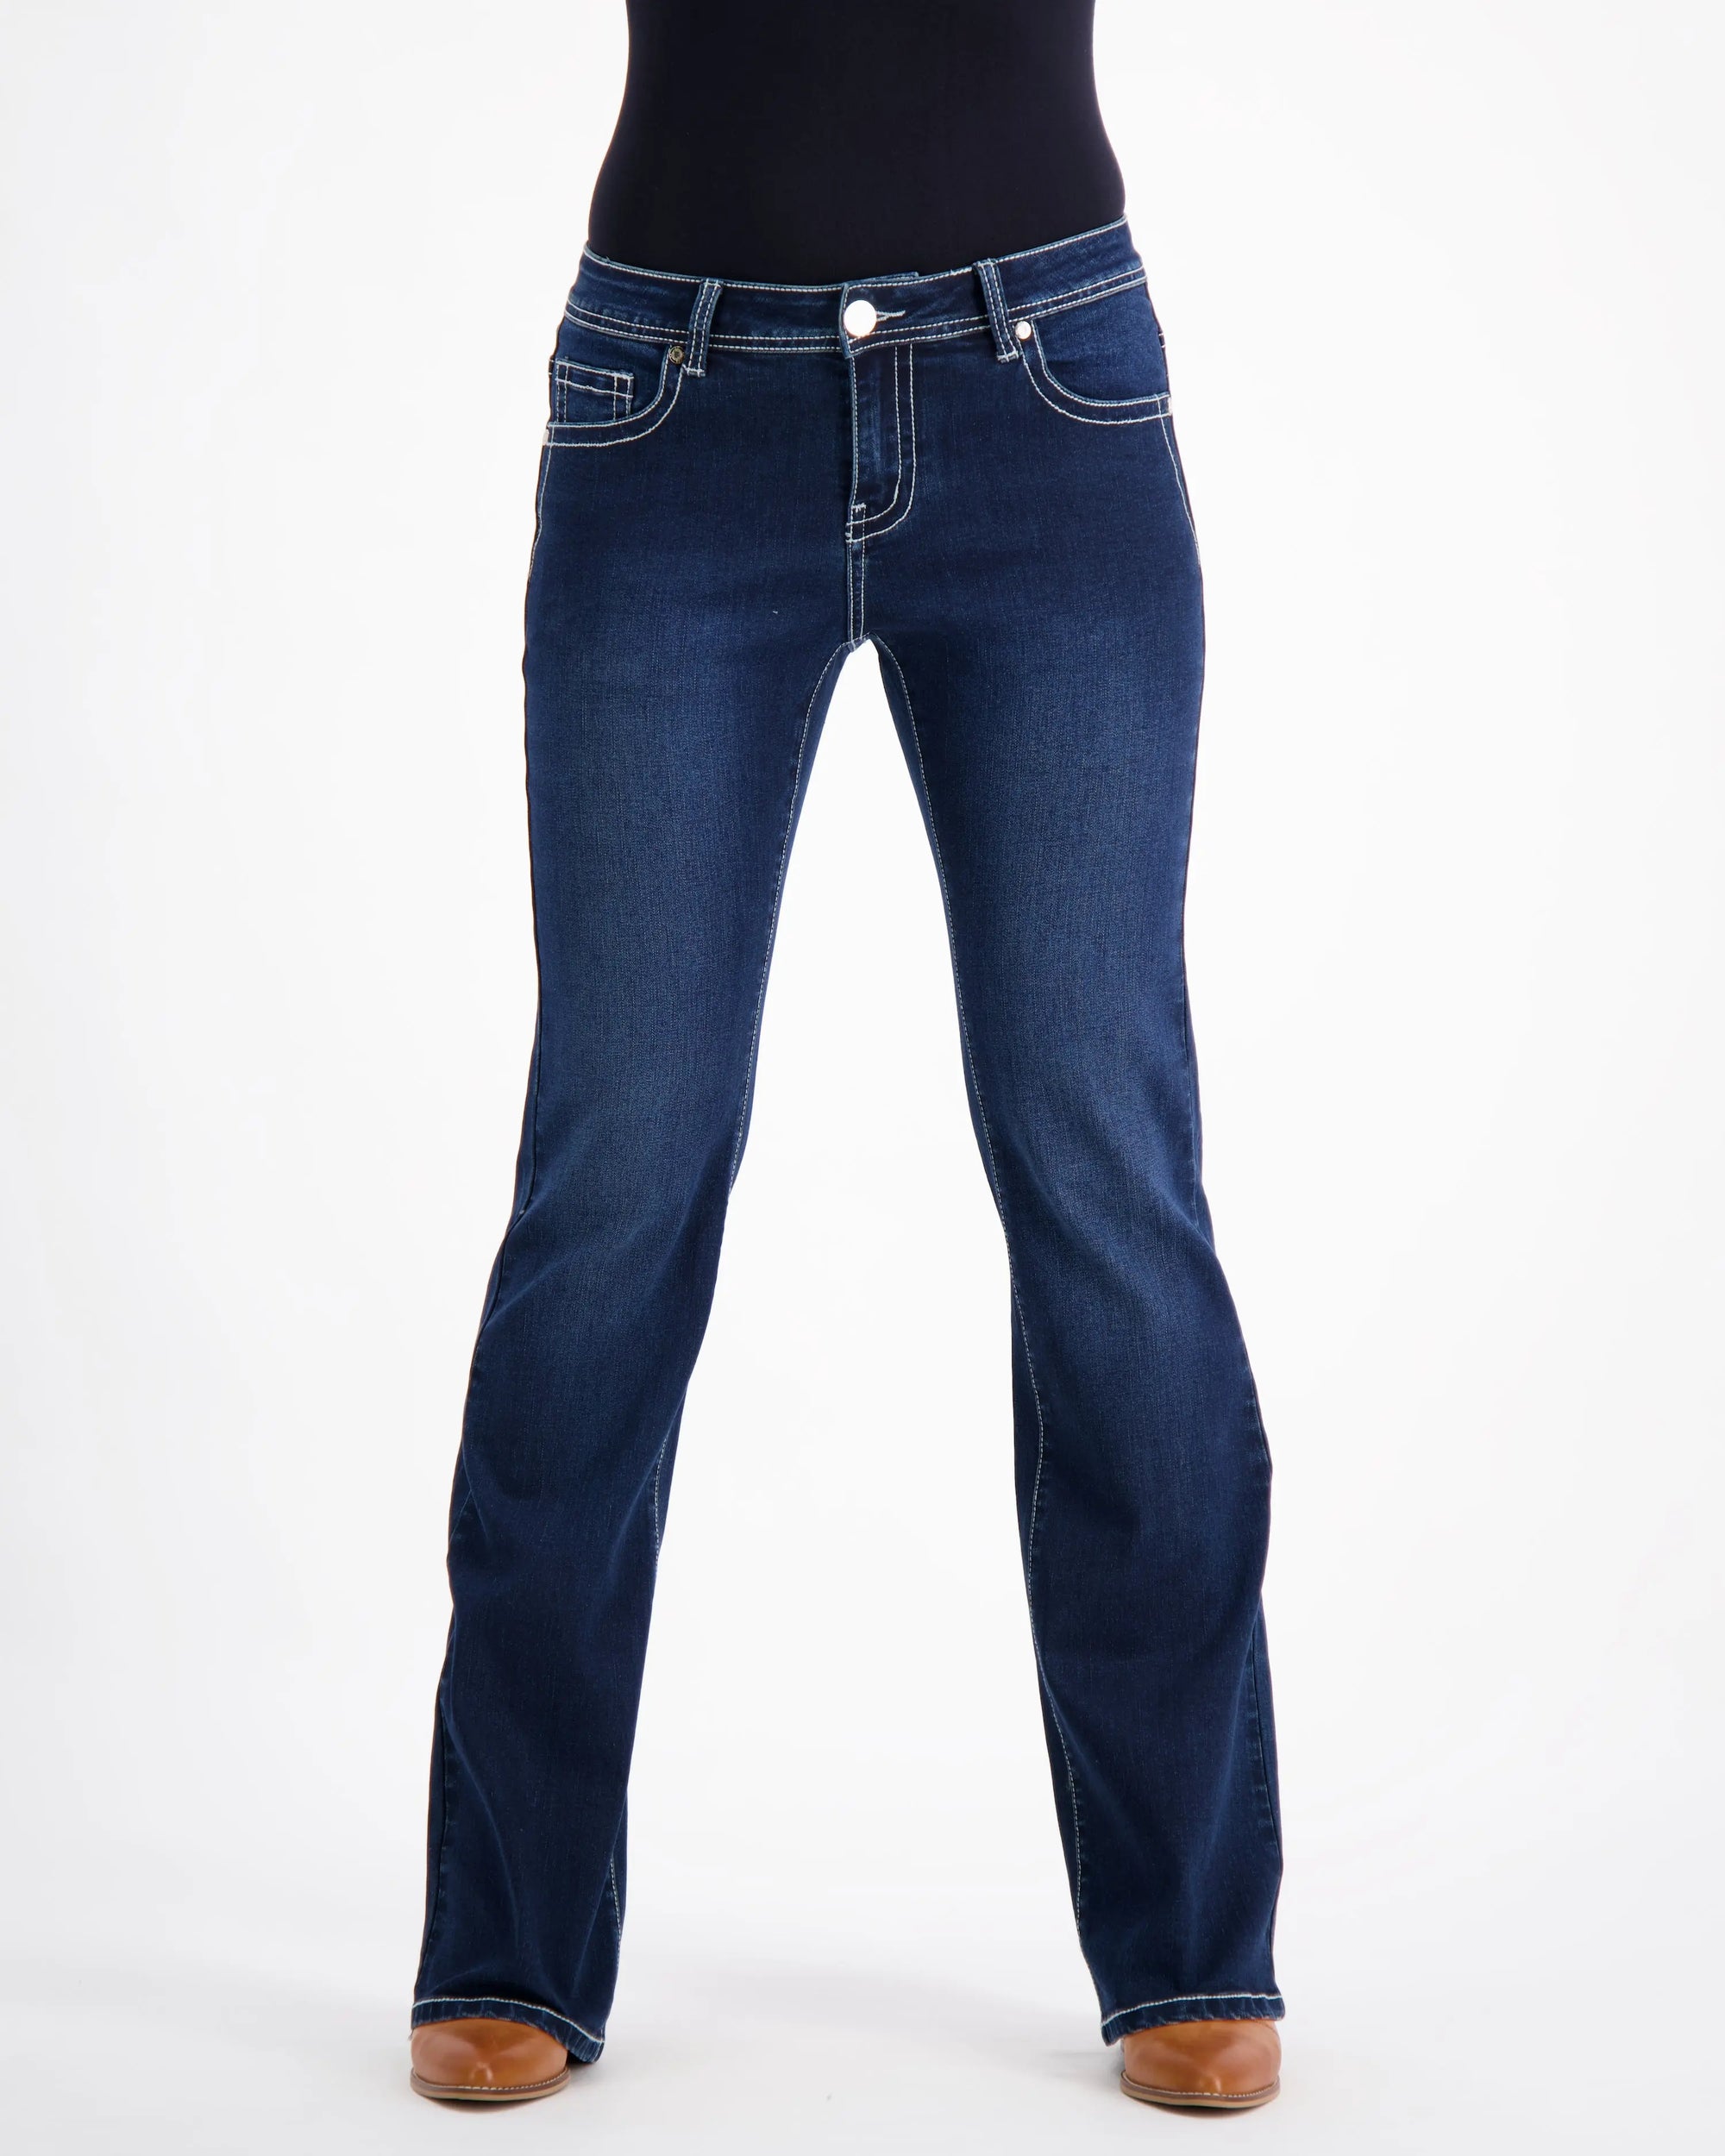 Stretch Denim Jeans Ashton Western Style Outback Supply Co 7906